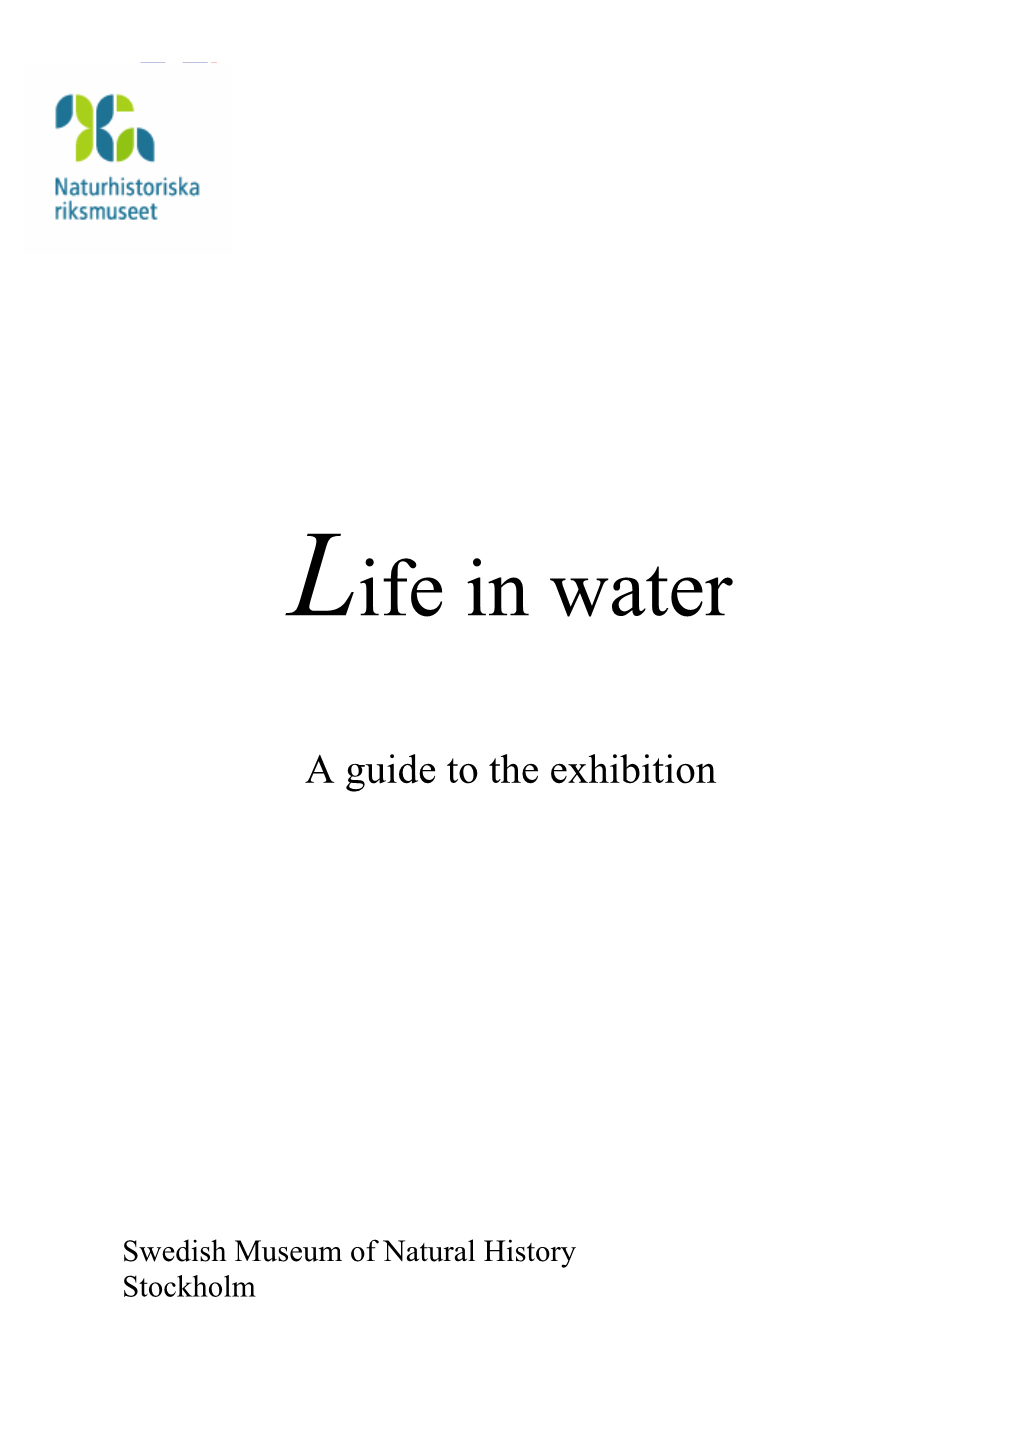 Life in Water